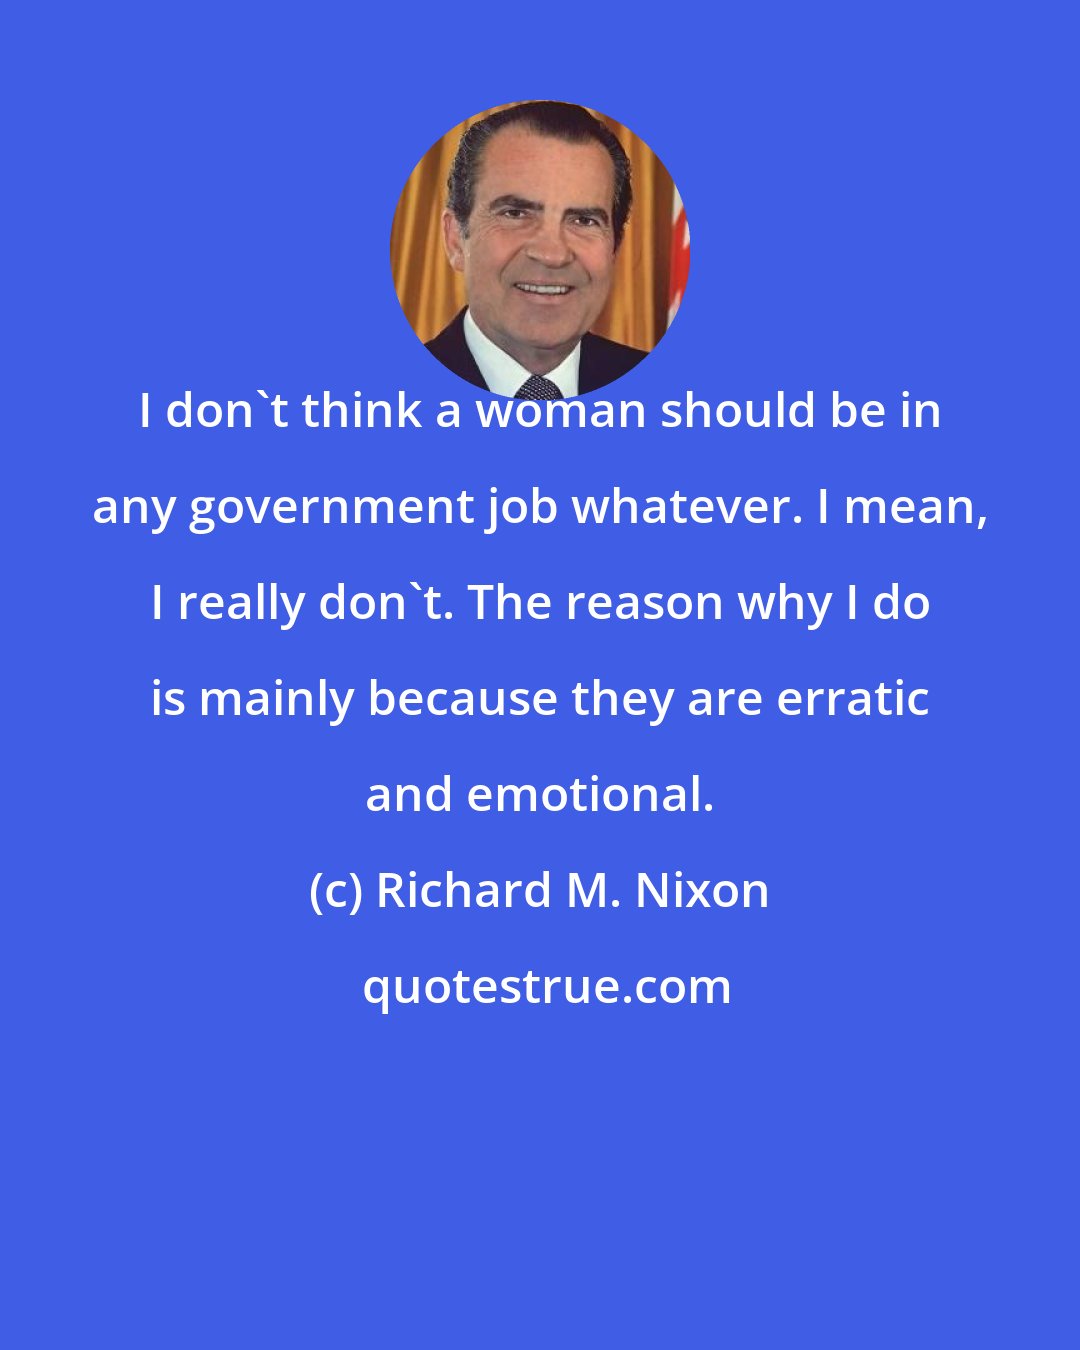 Richard M. Nixon: I don't think a woman should be in any government job whatever. I mean, I really don't. The reason why I do is mainly because they are erratic and emotional.